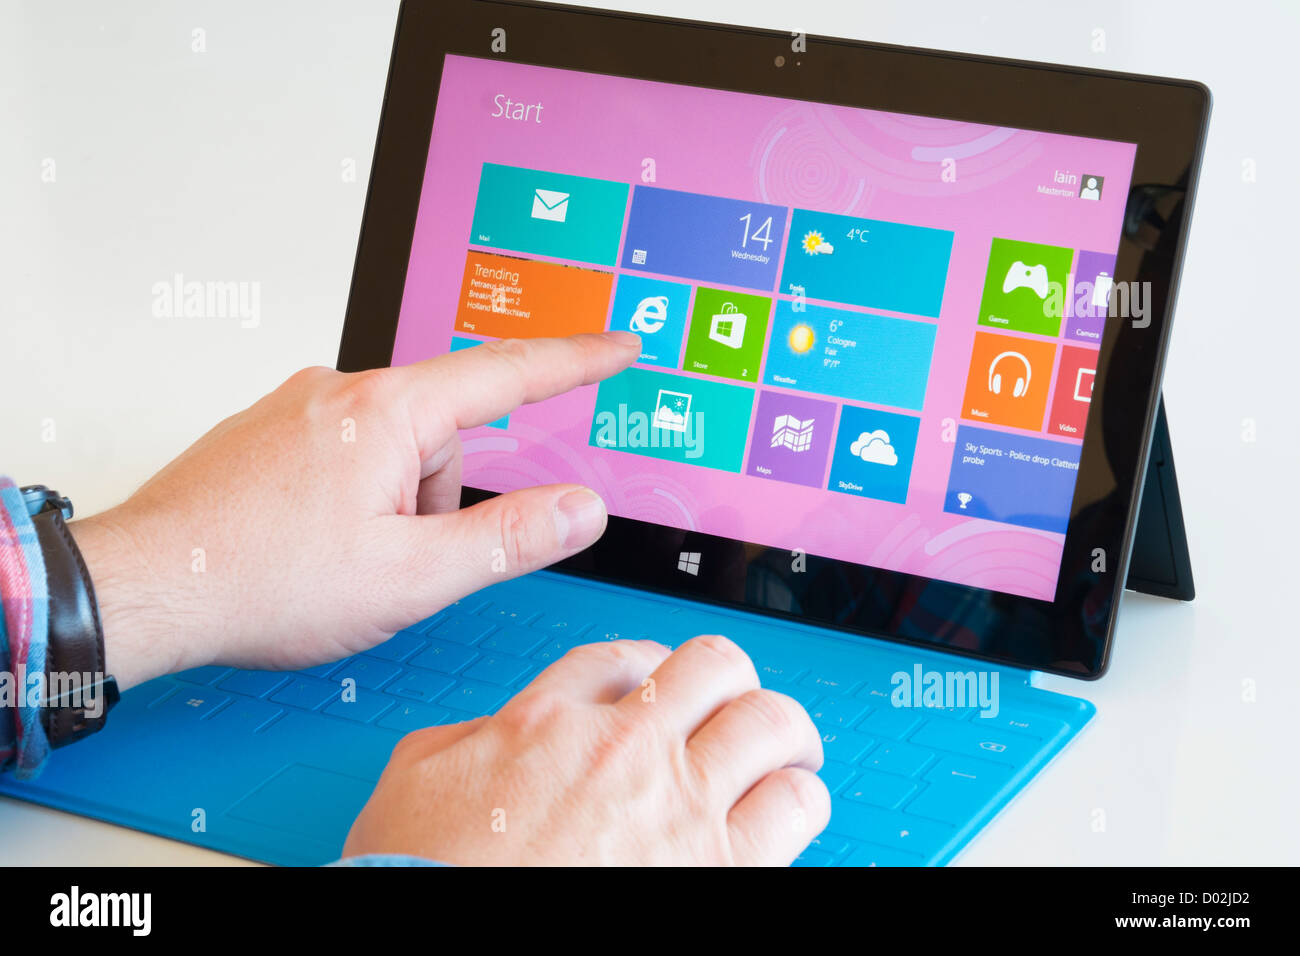 Microsoft Surface rt tablet computer with blue keyboard Stock Photo